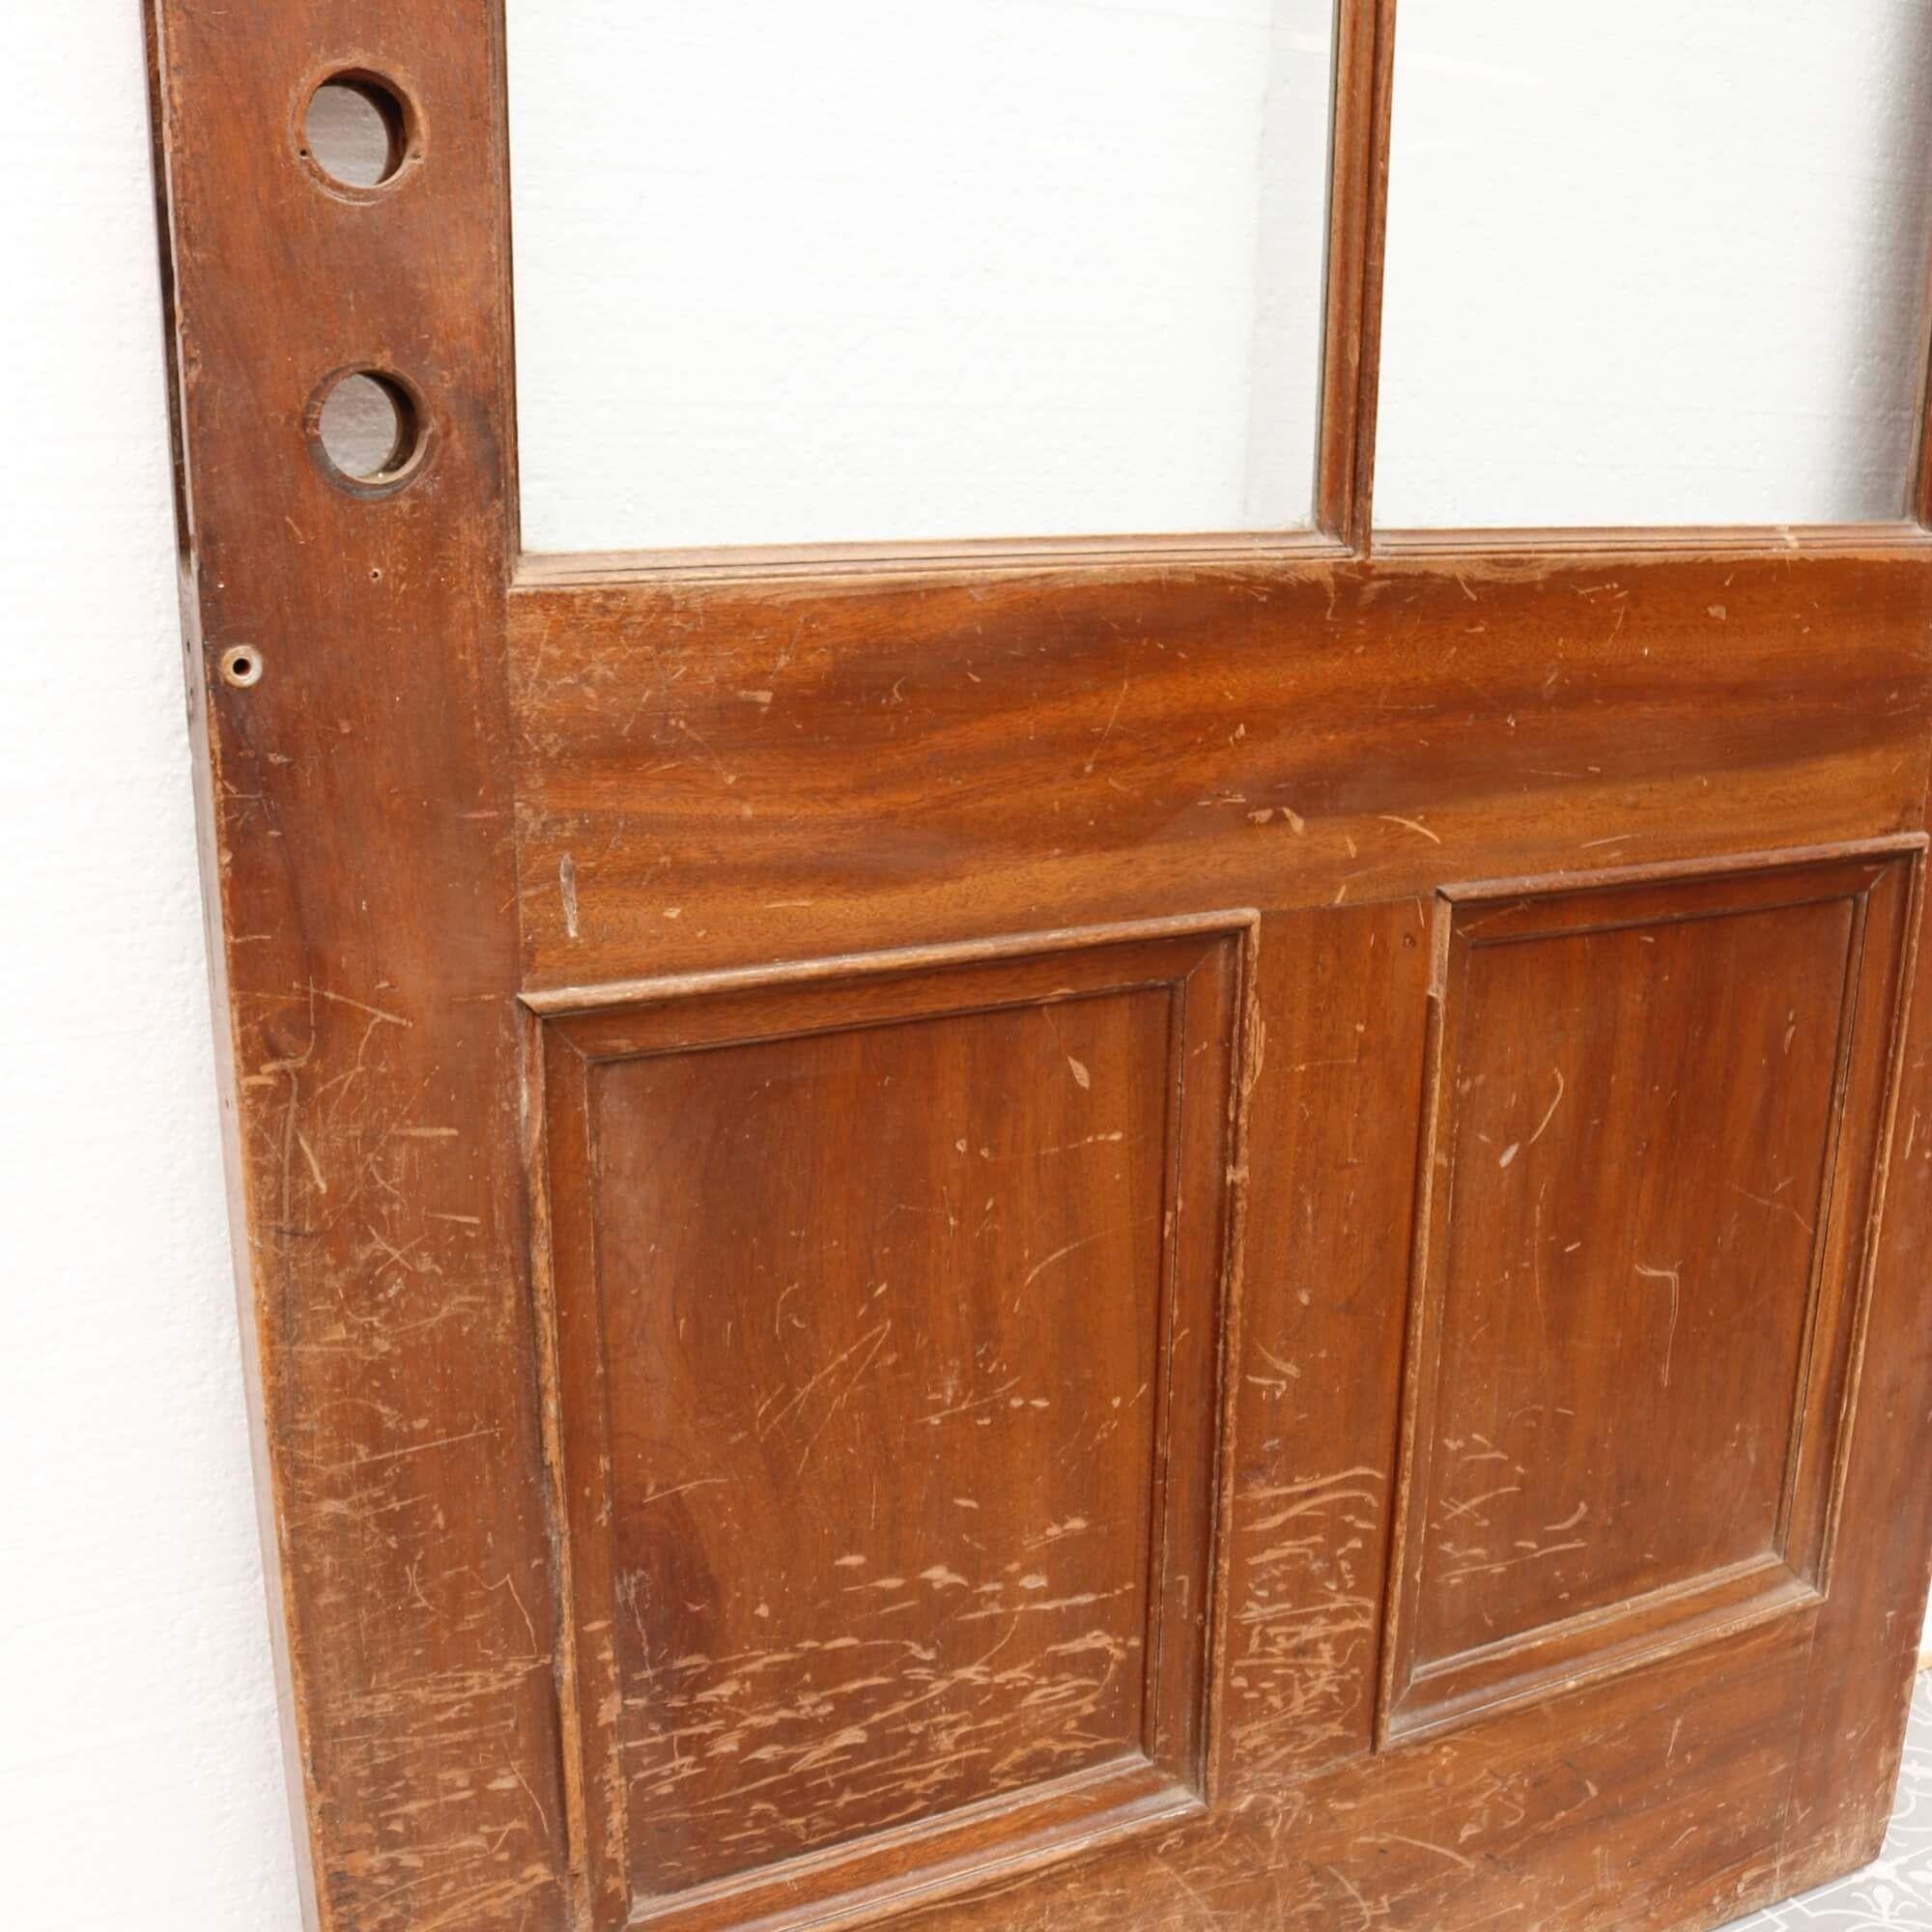 Antique Glazed Arched Interior Mahogany Door In Fair Condition For Sale In Wormelow, Herefordshire